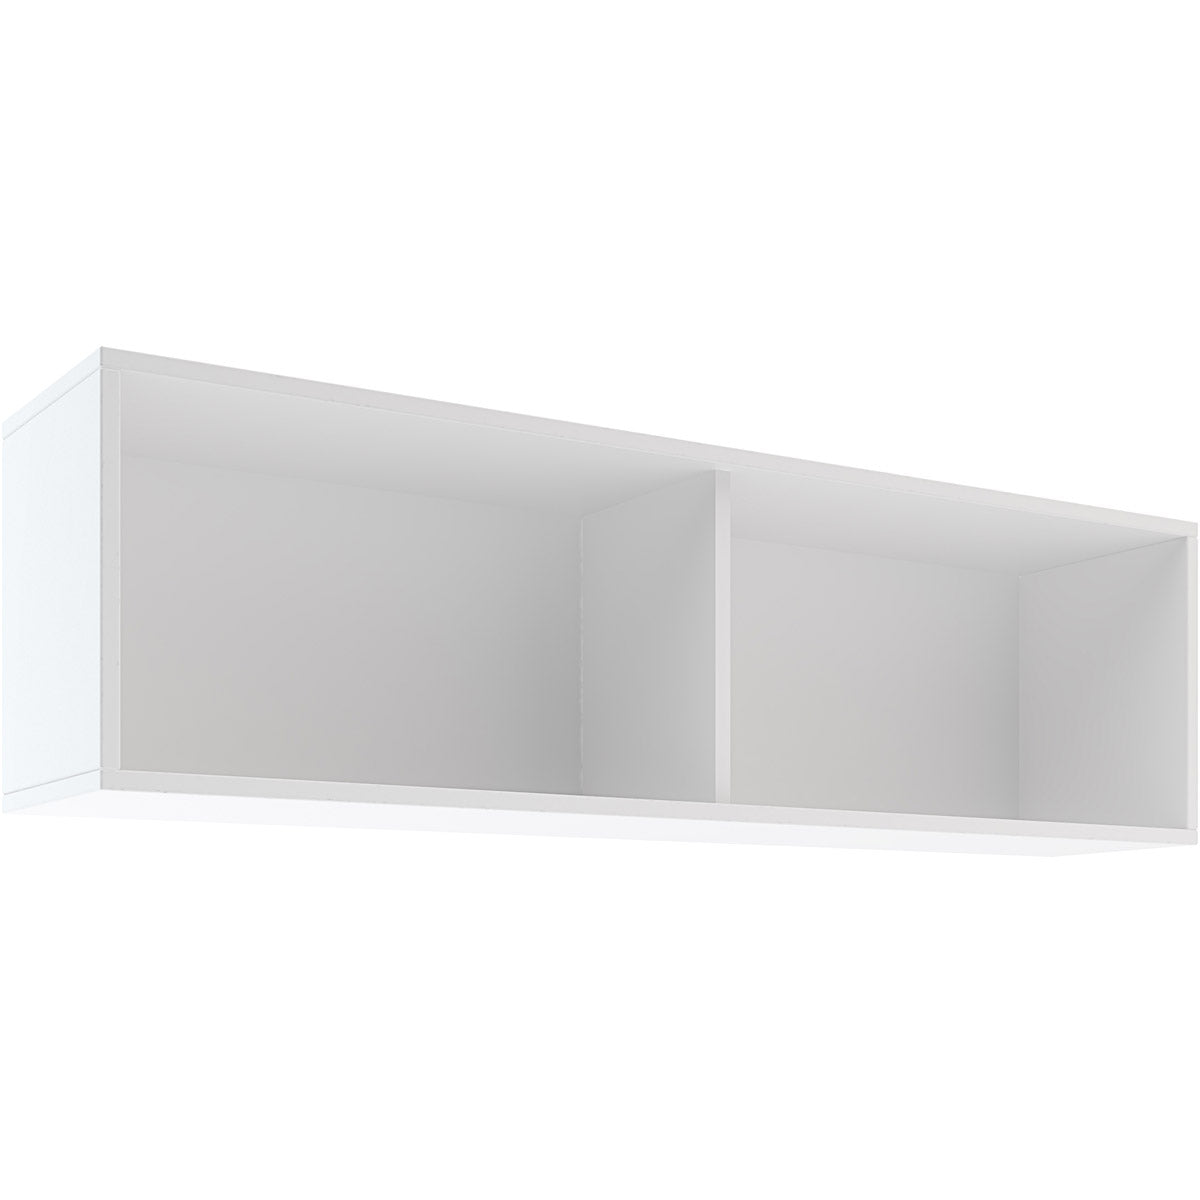 Oeuf Perch Loft Shelf for Books and Toy Storage Shelves